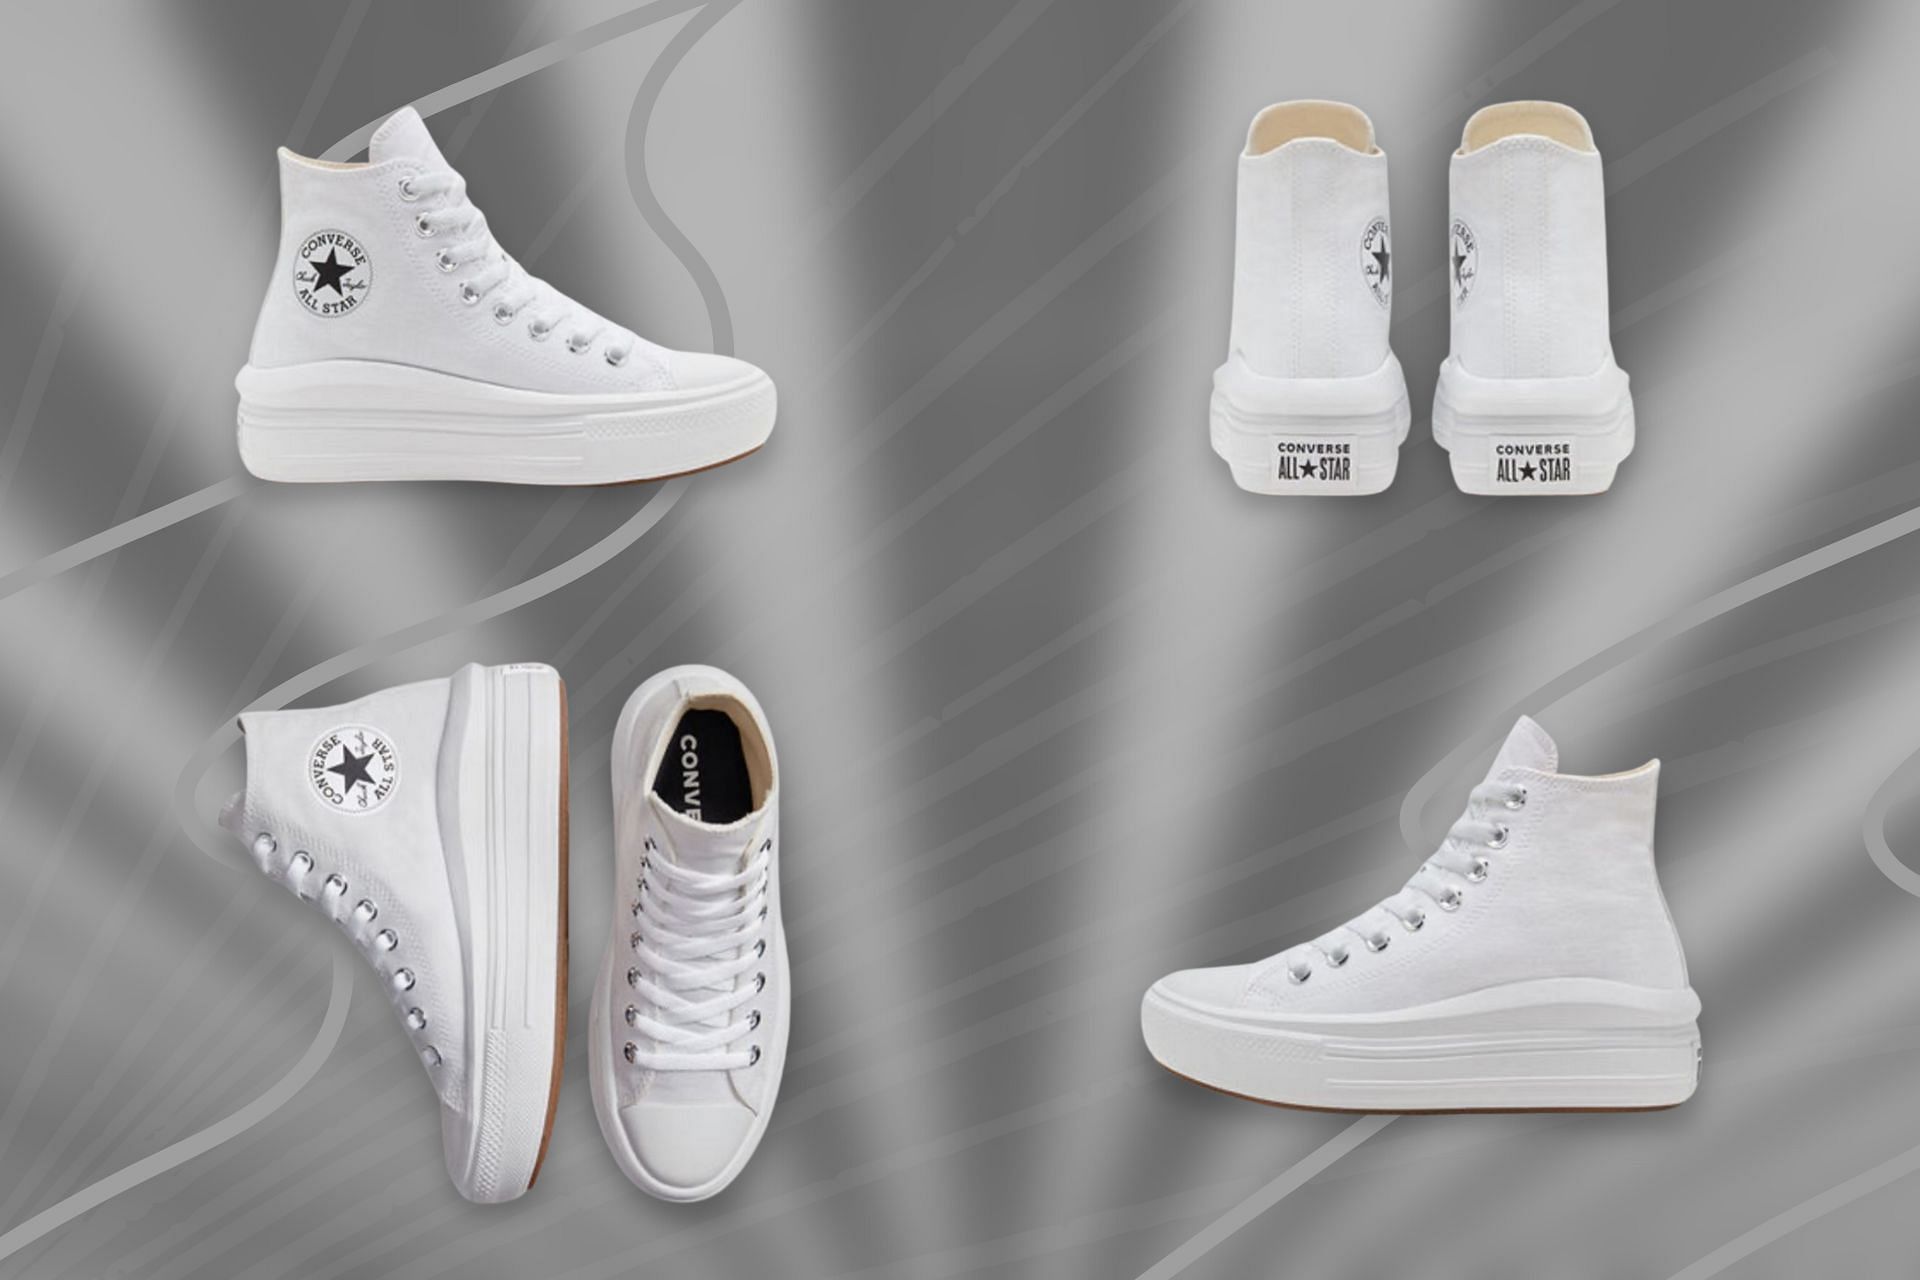 Take a closer look at the Chuck Taylor All-Star Move Platform shoes (Image via Sportskeeda)